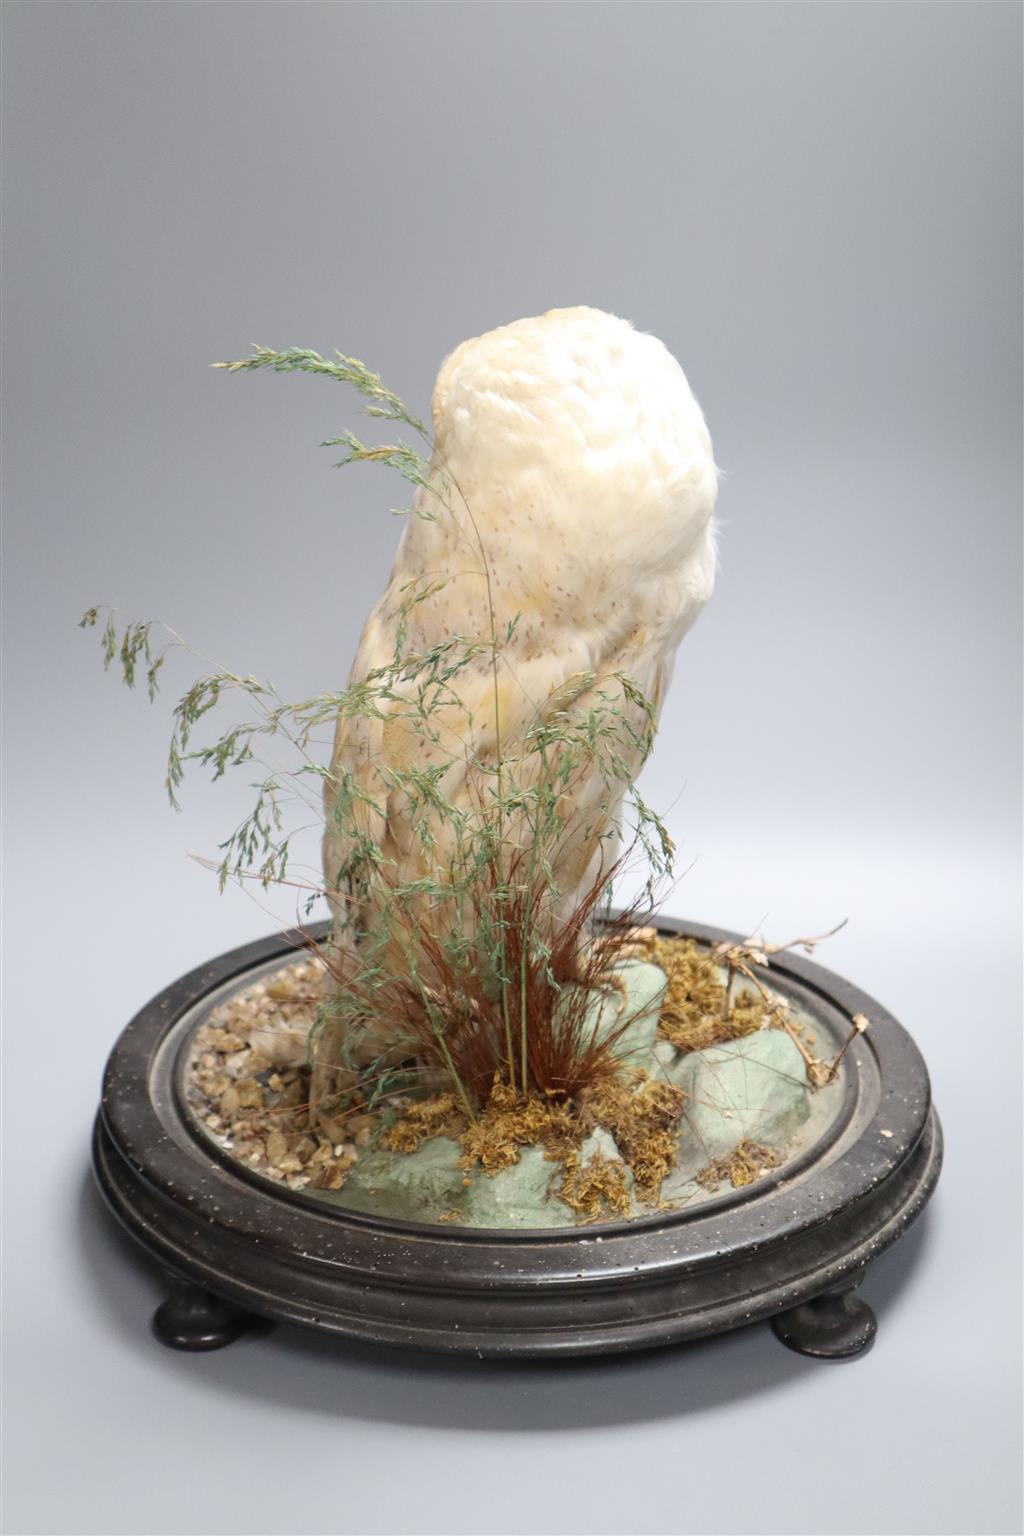 A taxidermic Snowy owl, under glass dome on stand, height overall 44cm